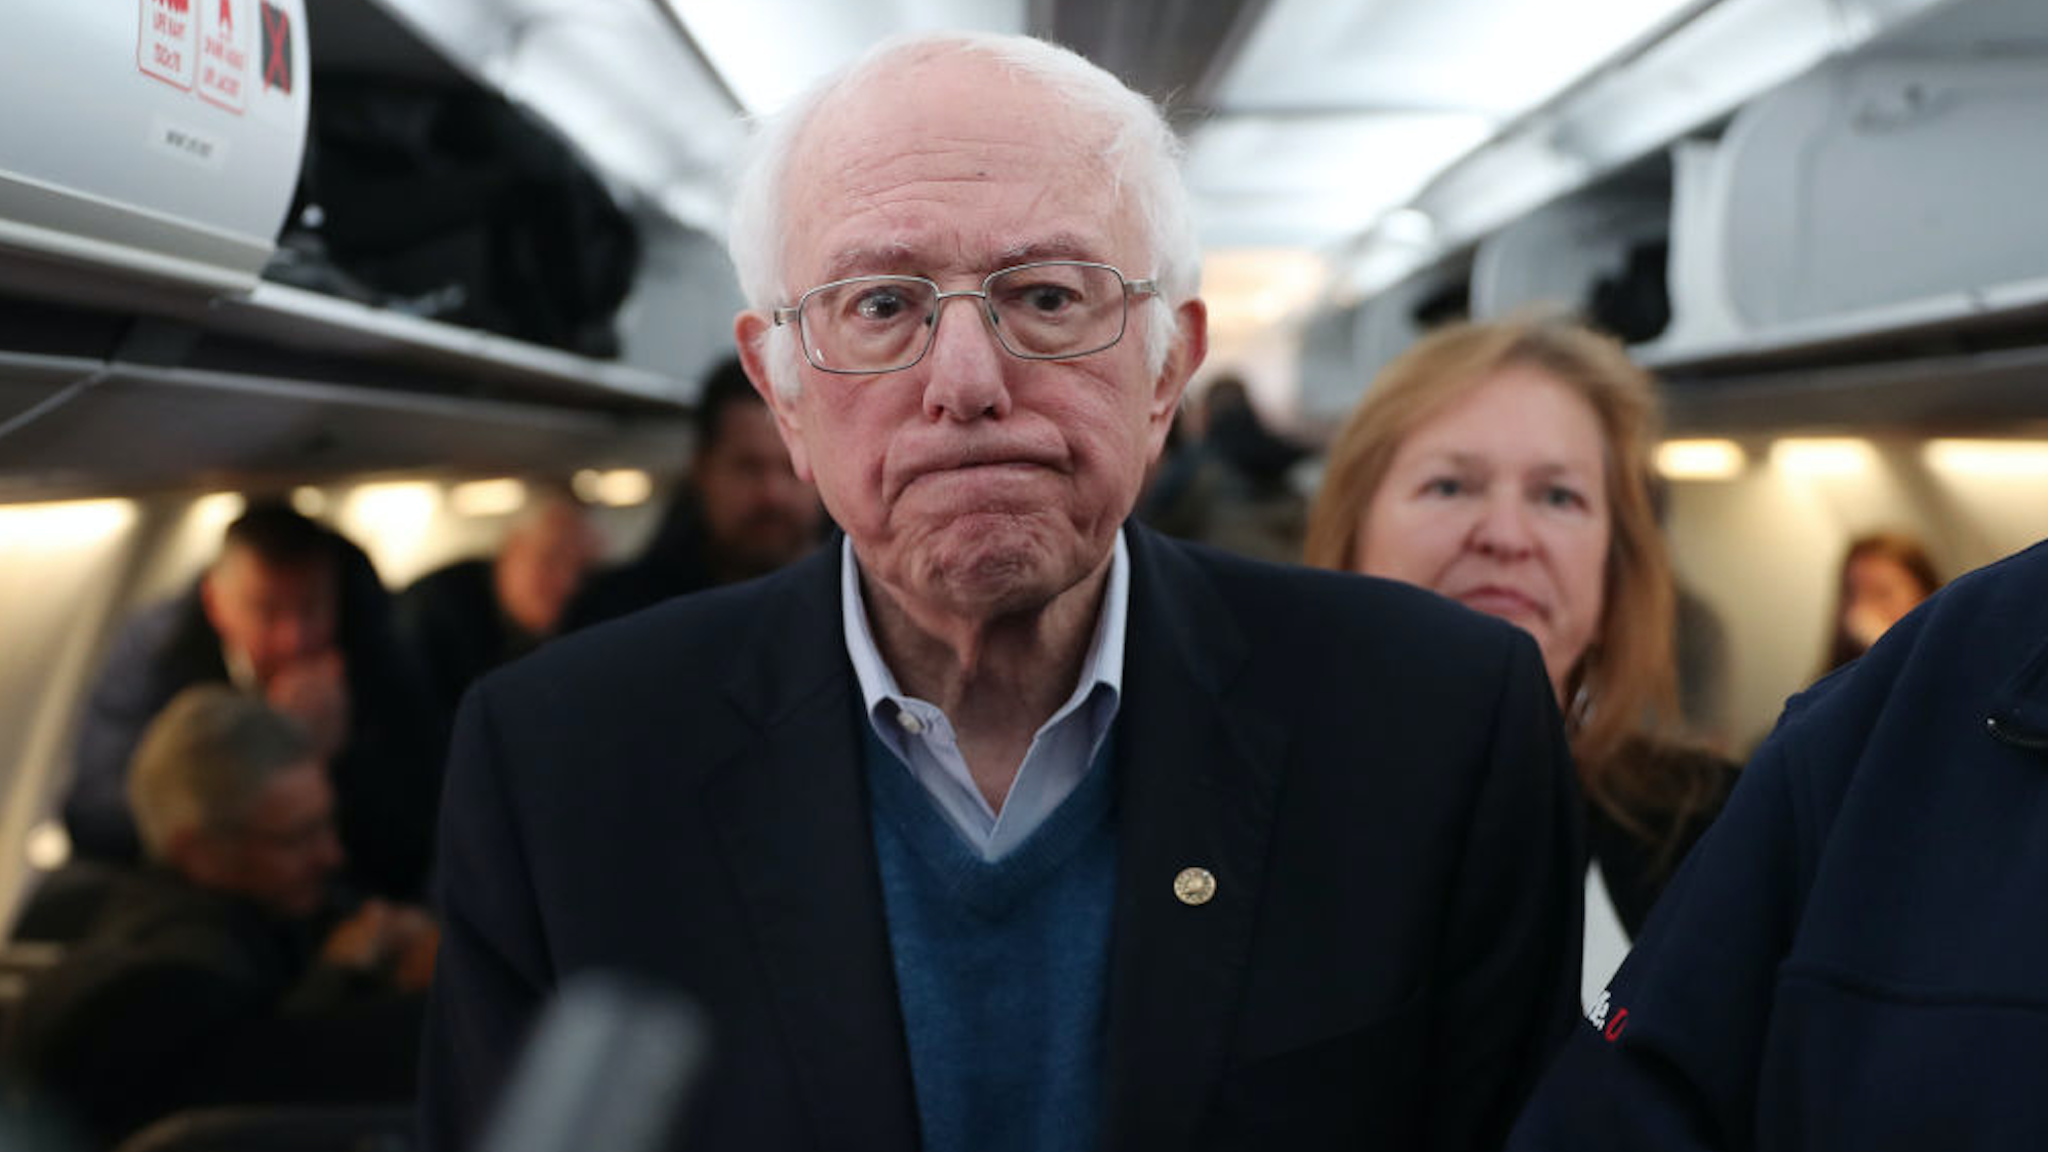 Democratic presidential candidate Sen. Bernie Sanders (I-VT) speaks to the media after boarding the plane at the Des Moines International Airport on February 04, 2020 in Des Moines, Iowa.